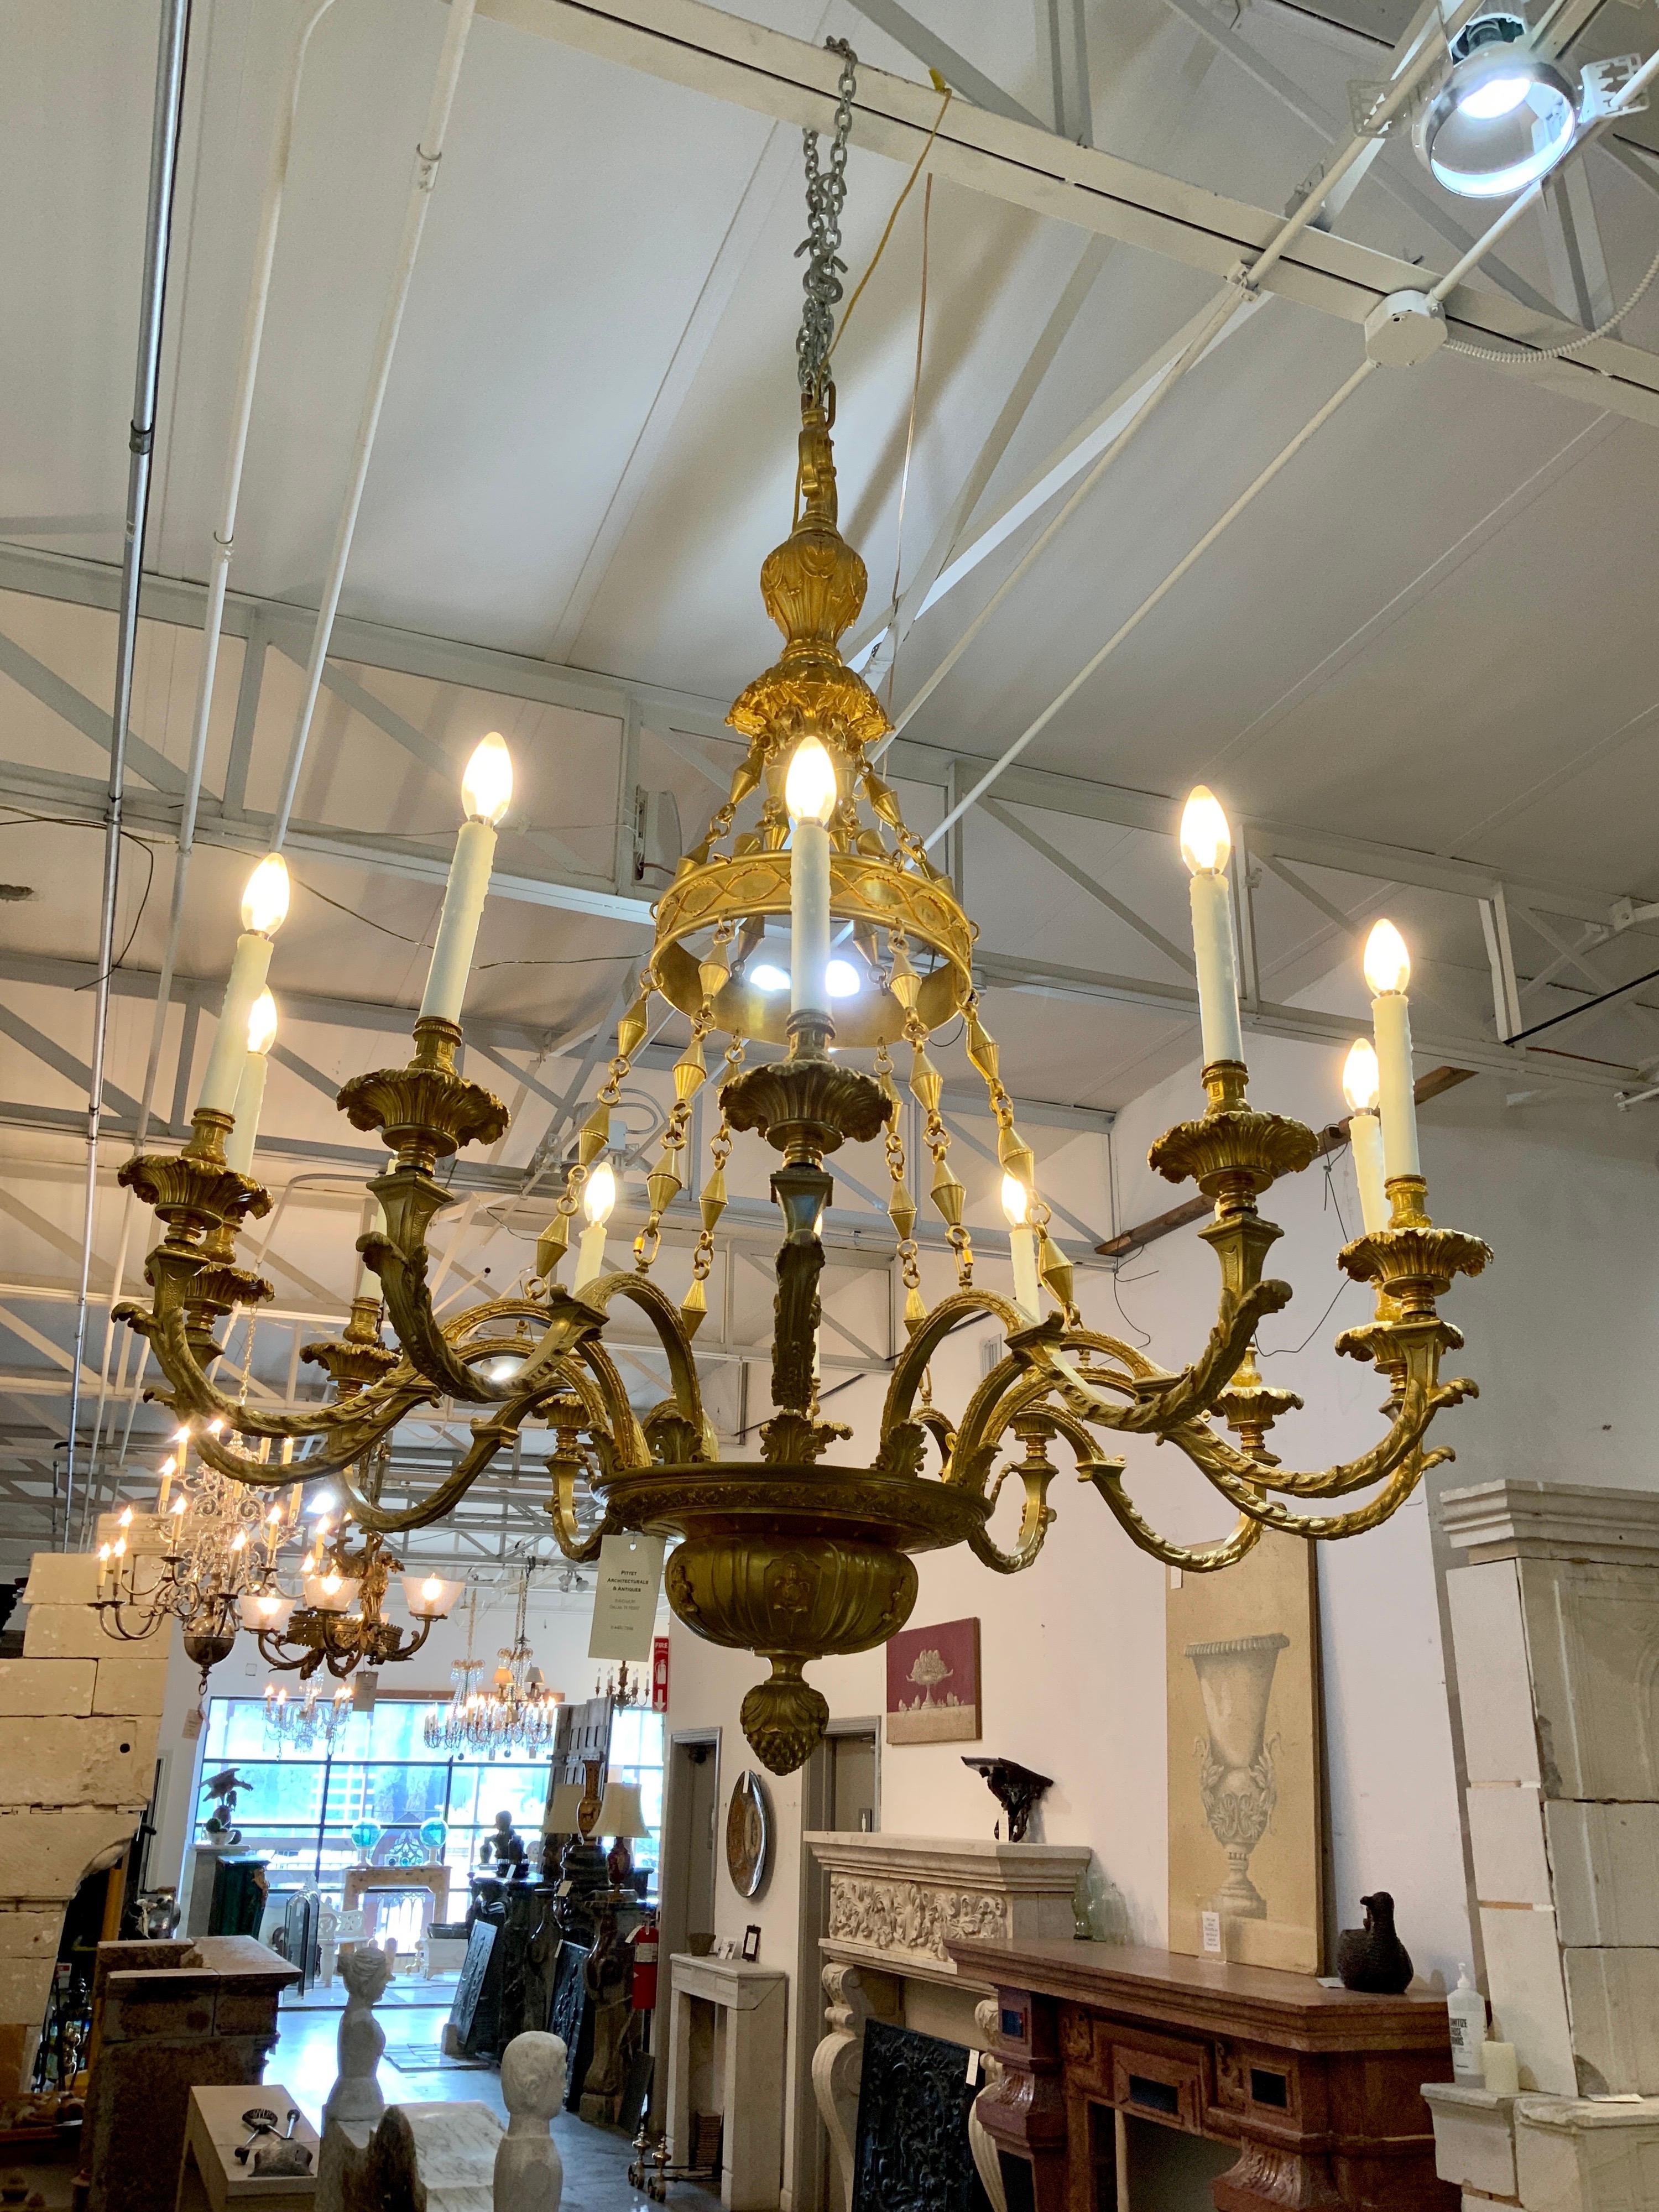 This bronze chandelier origins from France, circa 1920.